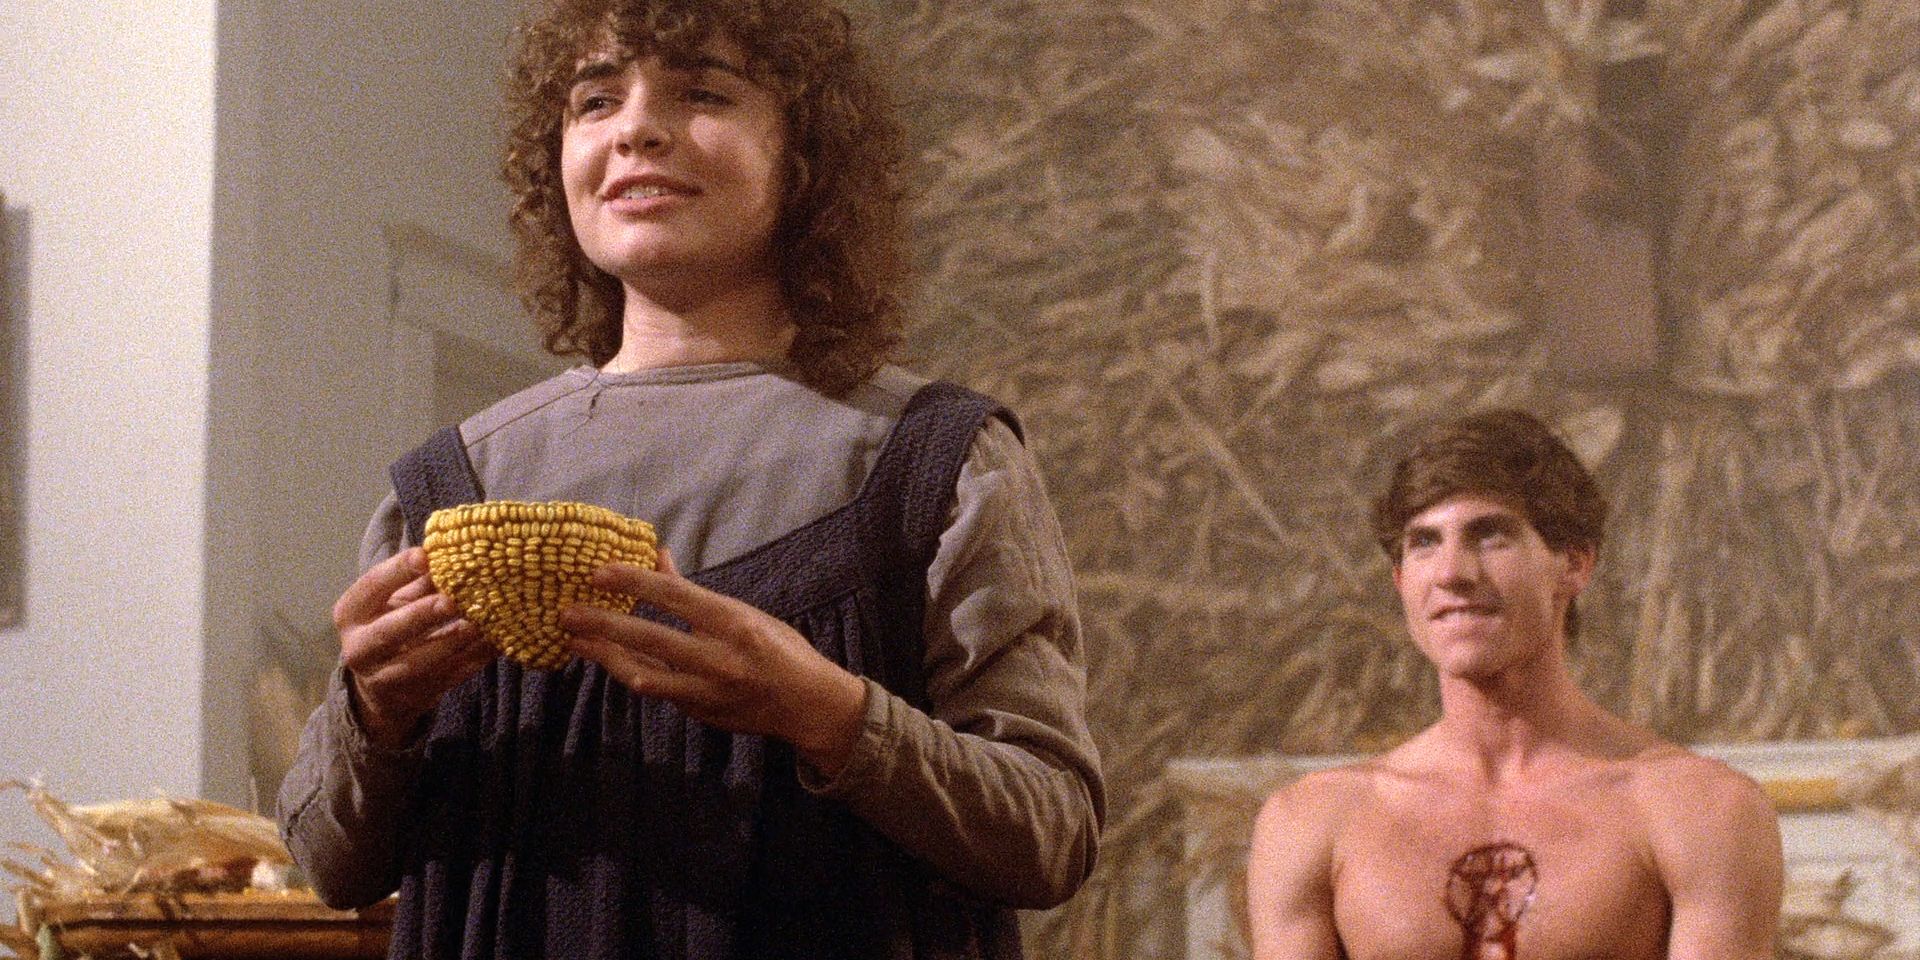 How Children of the Corn's Remake Can improve On the Original